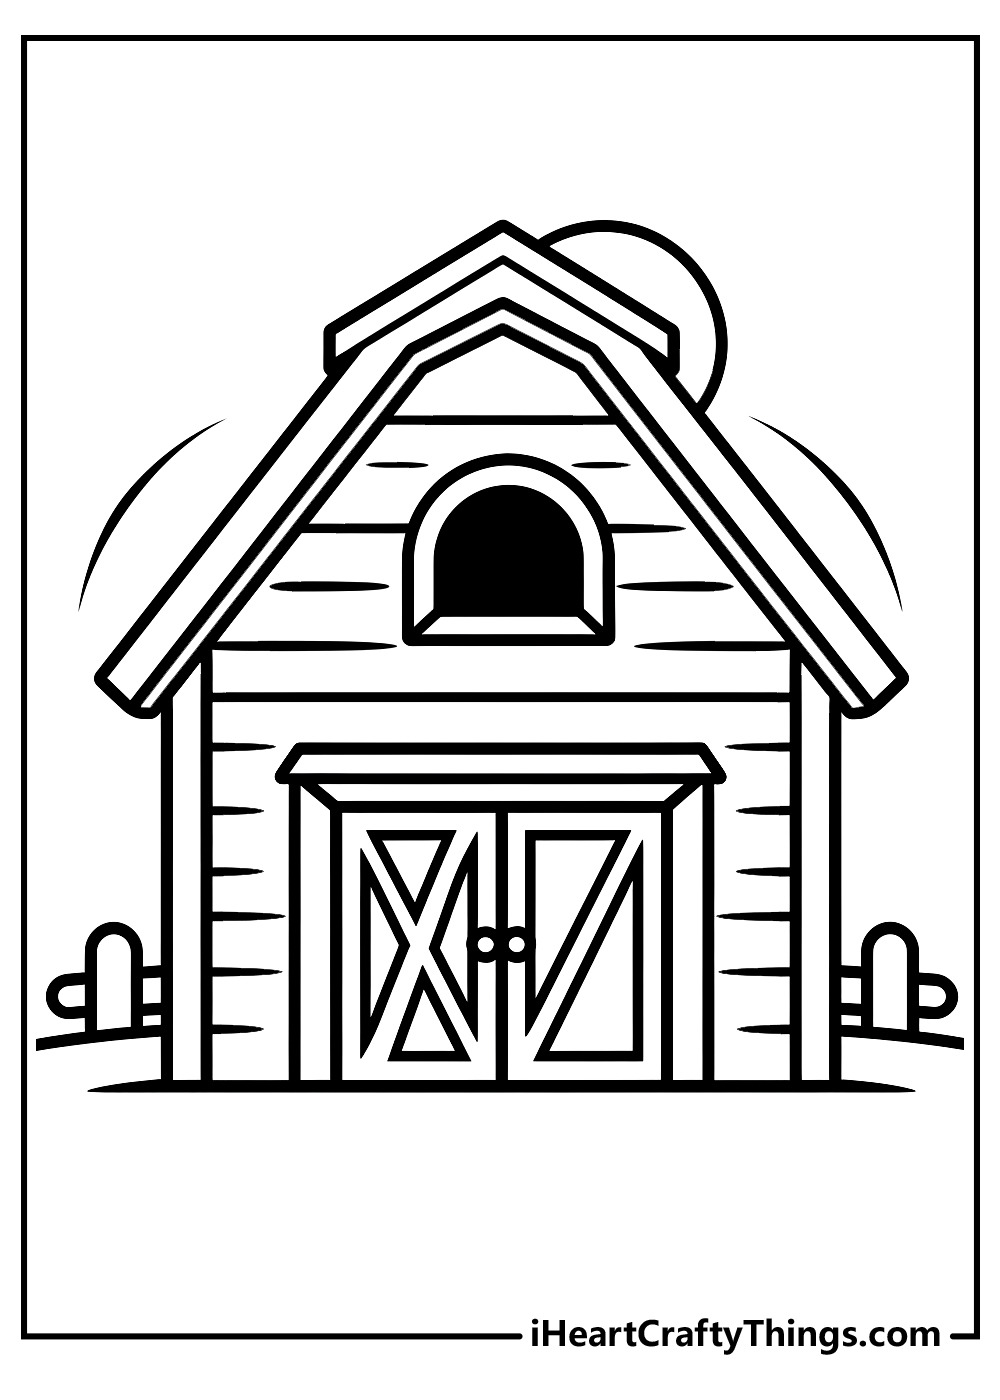 barn coloring pages free download